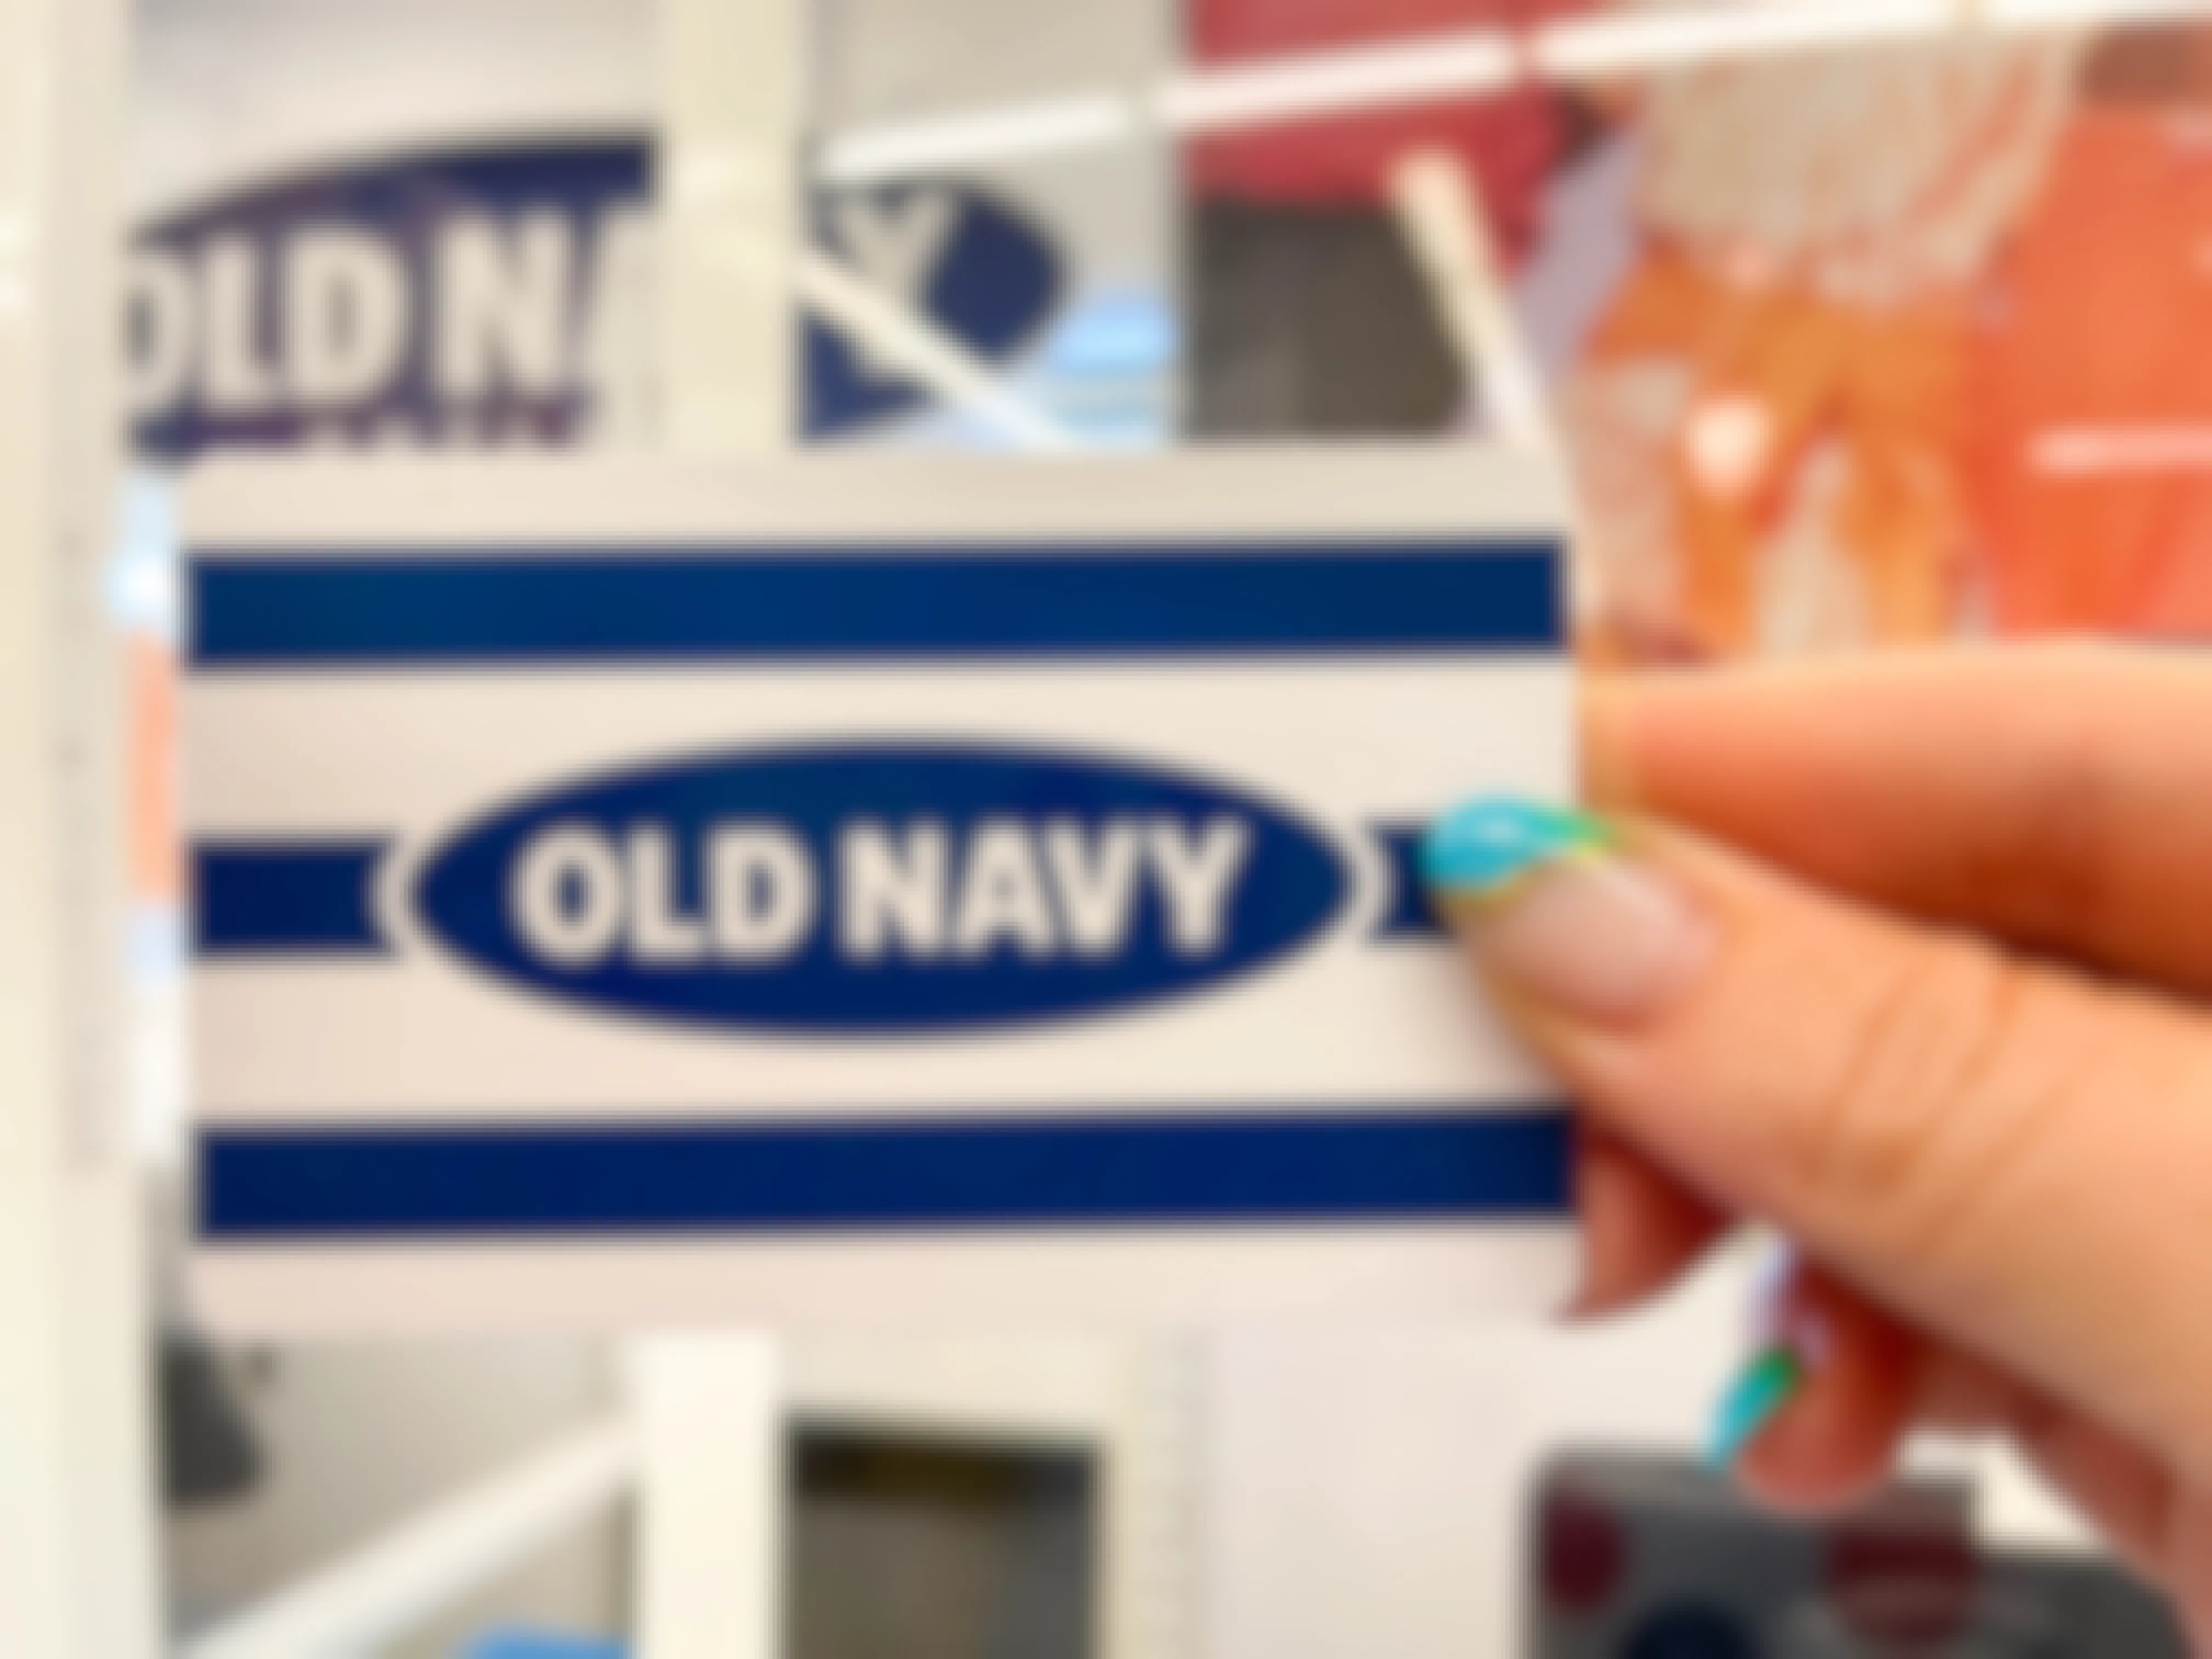 hand holding old navy gift card